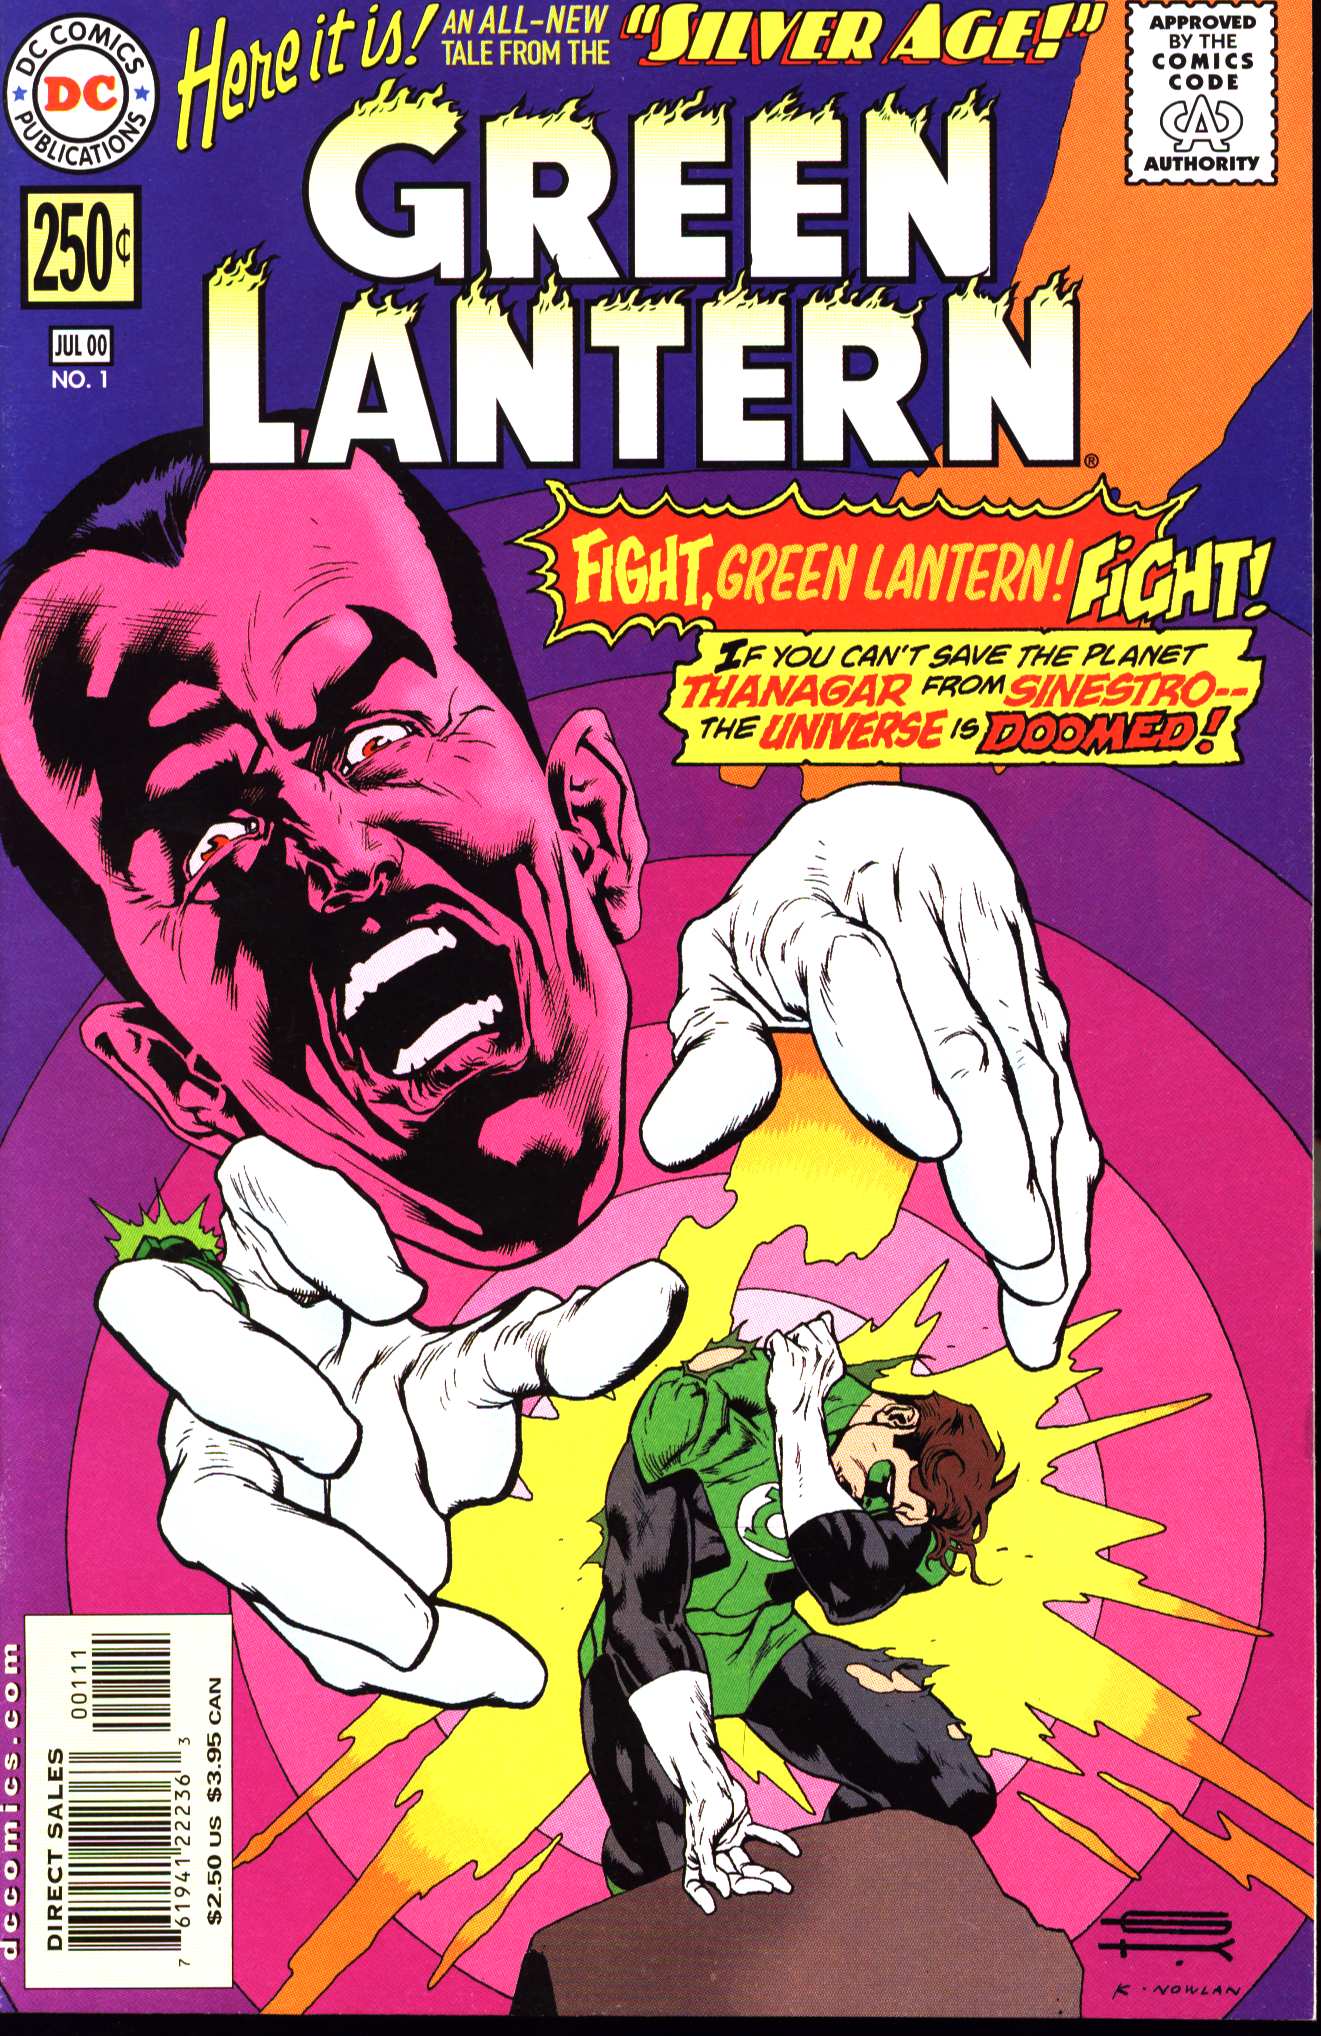 Read online Silver Age: Green Lantern comic -  Issue # Full - 1